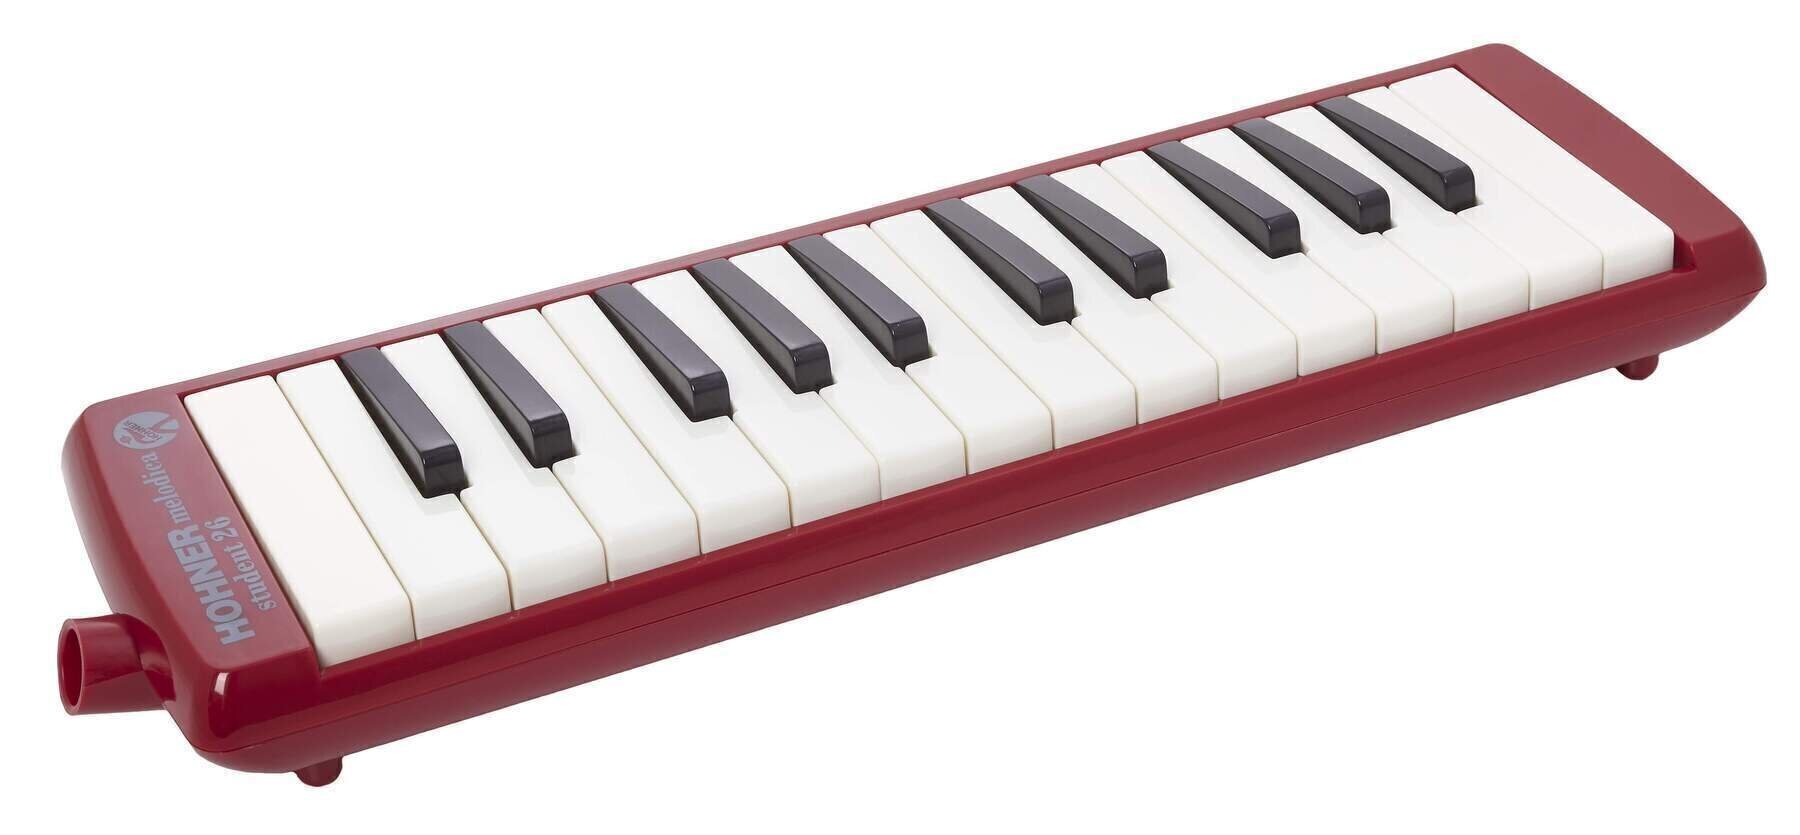 Melodica Hohner Student 26 Melodica Red